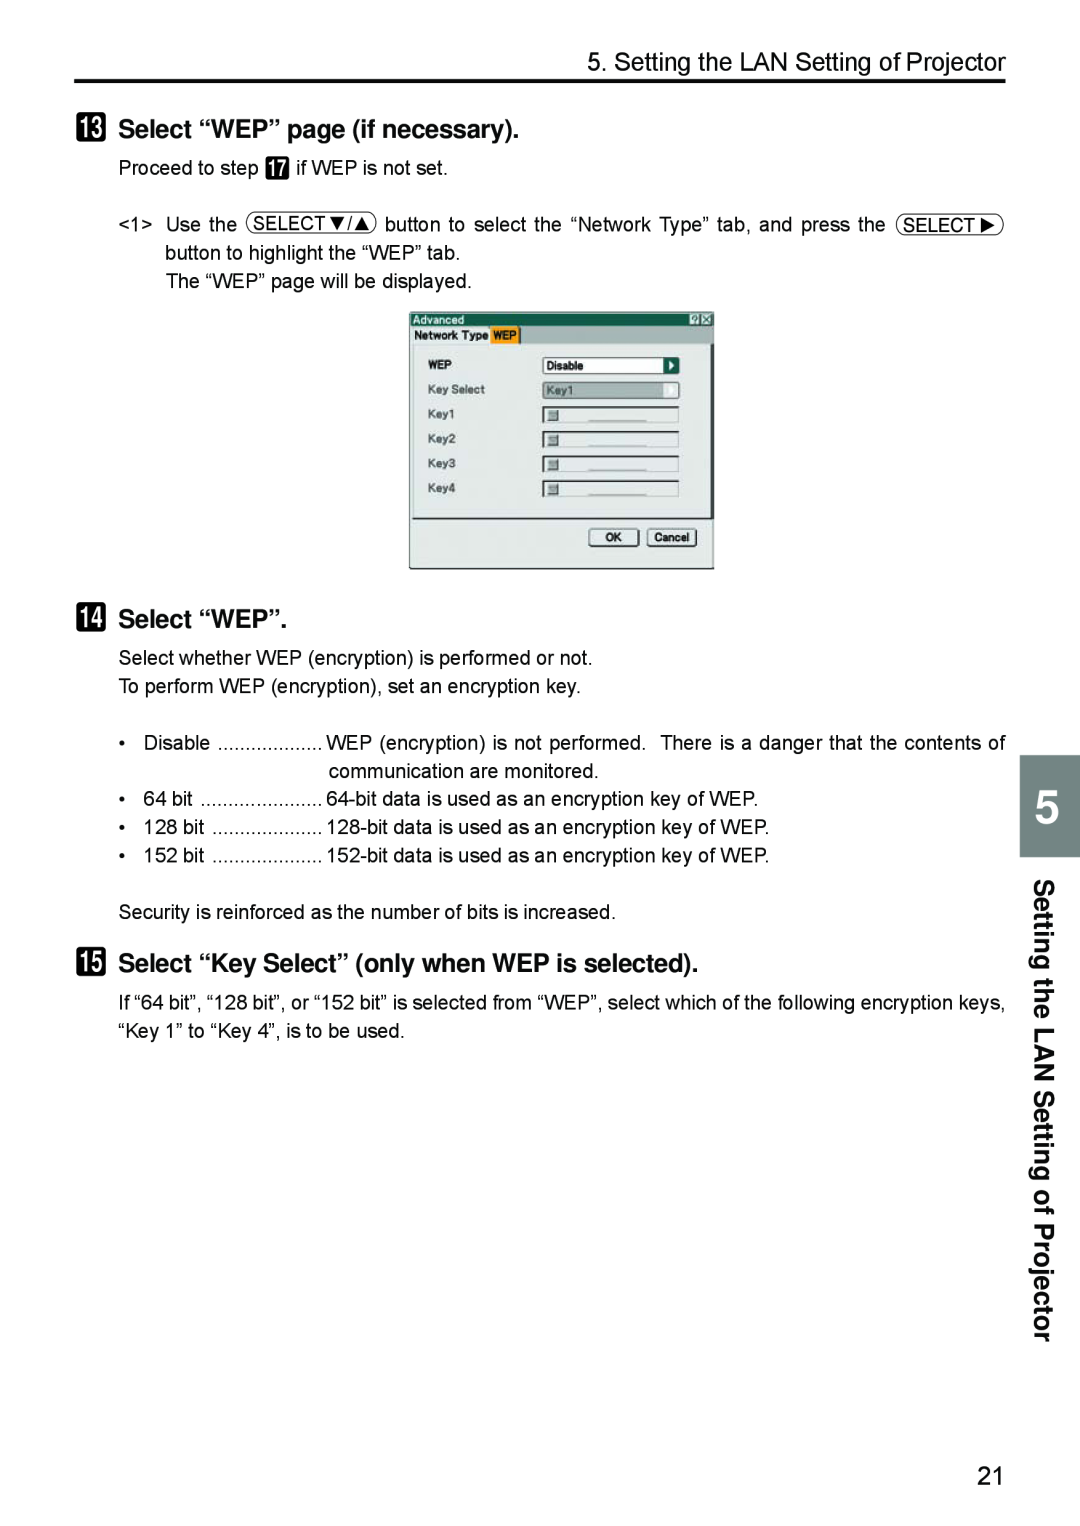 Dukane 8808 user manual Select “WEP” page if necessary, Select “Key Select” only when WEP is selected 